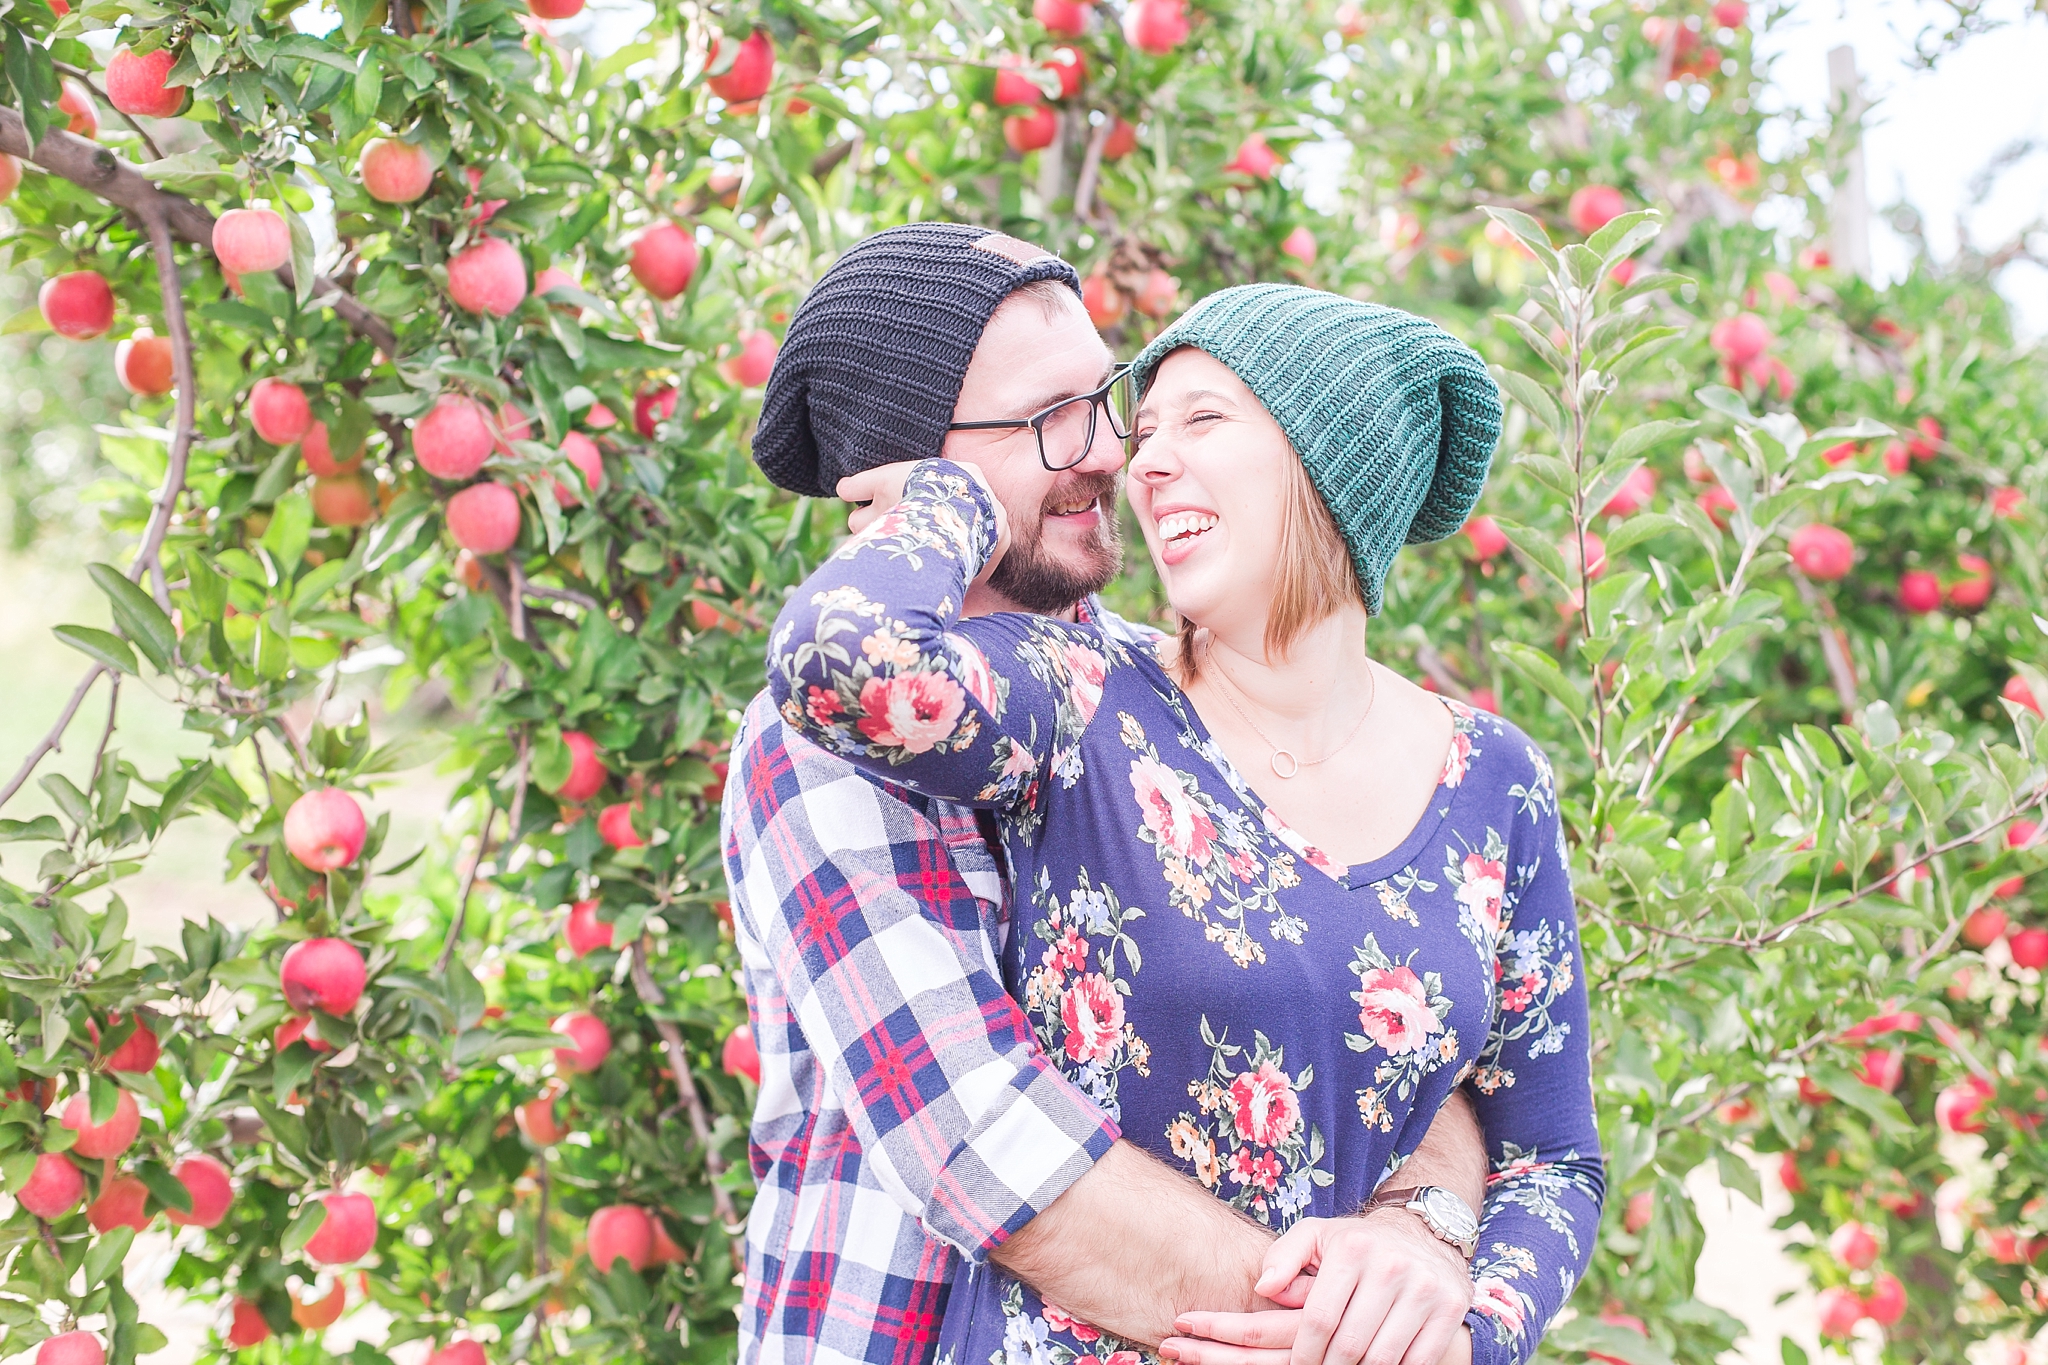 playful-fall-engagement-photos-at-hy's-cider-mill-ochard-in-bruce-township-michigan-by-courtney-carolyn-photography_0020.jpg